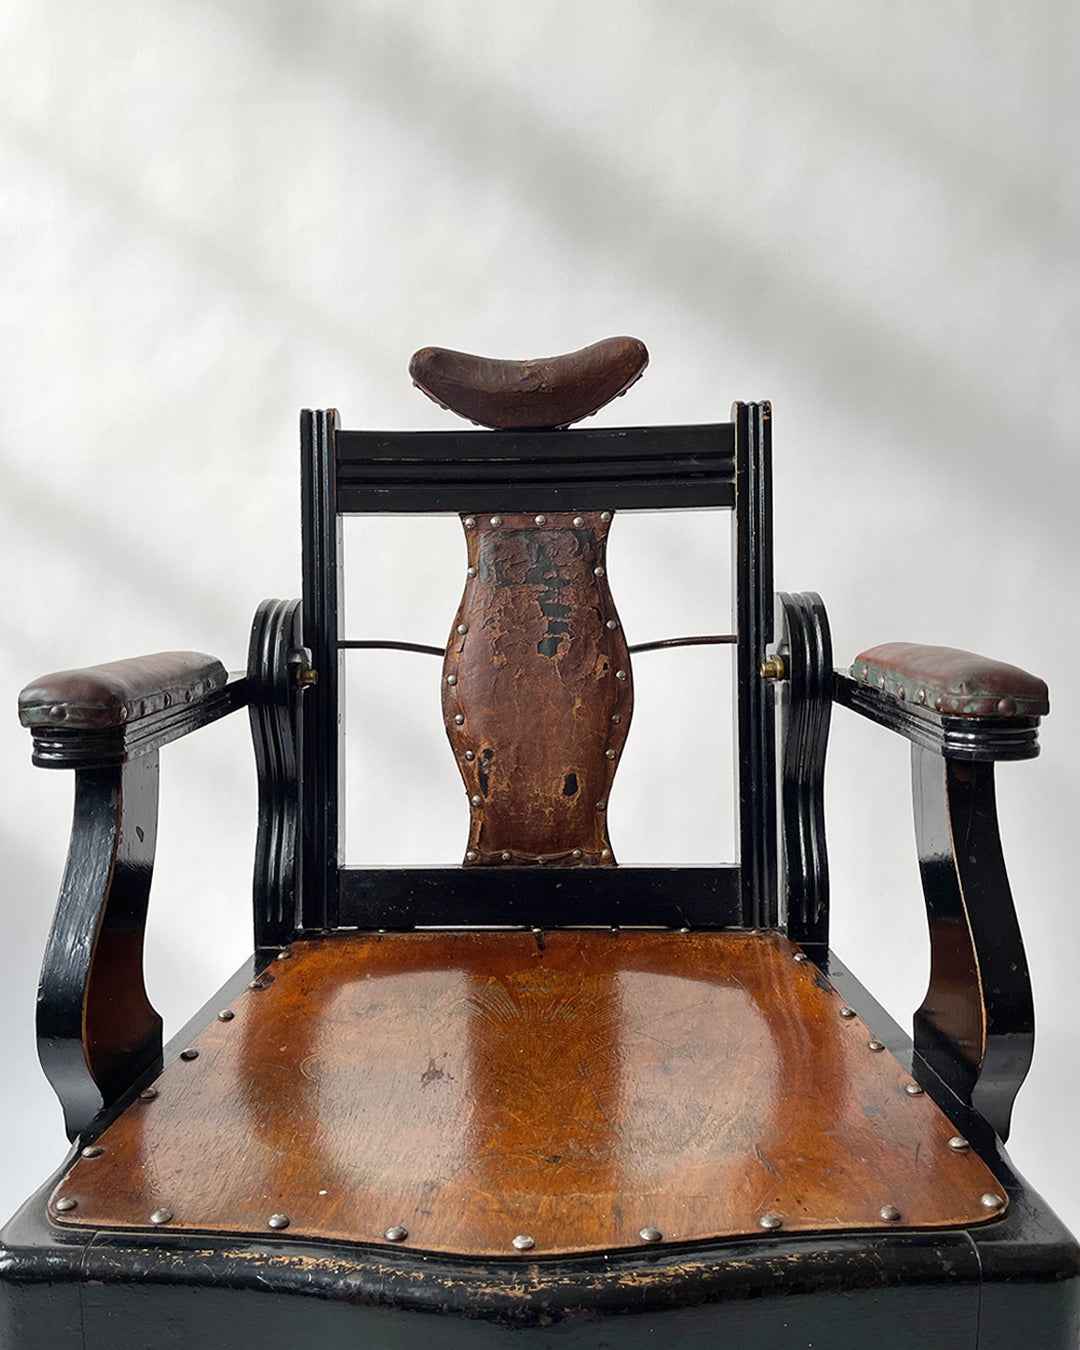 Antique Barber Chair.